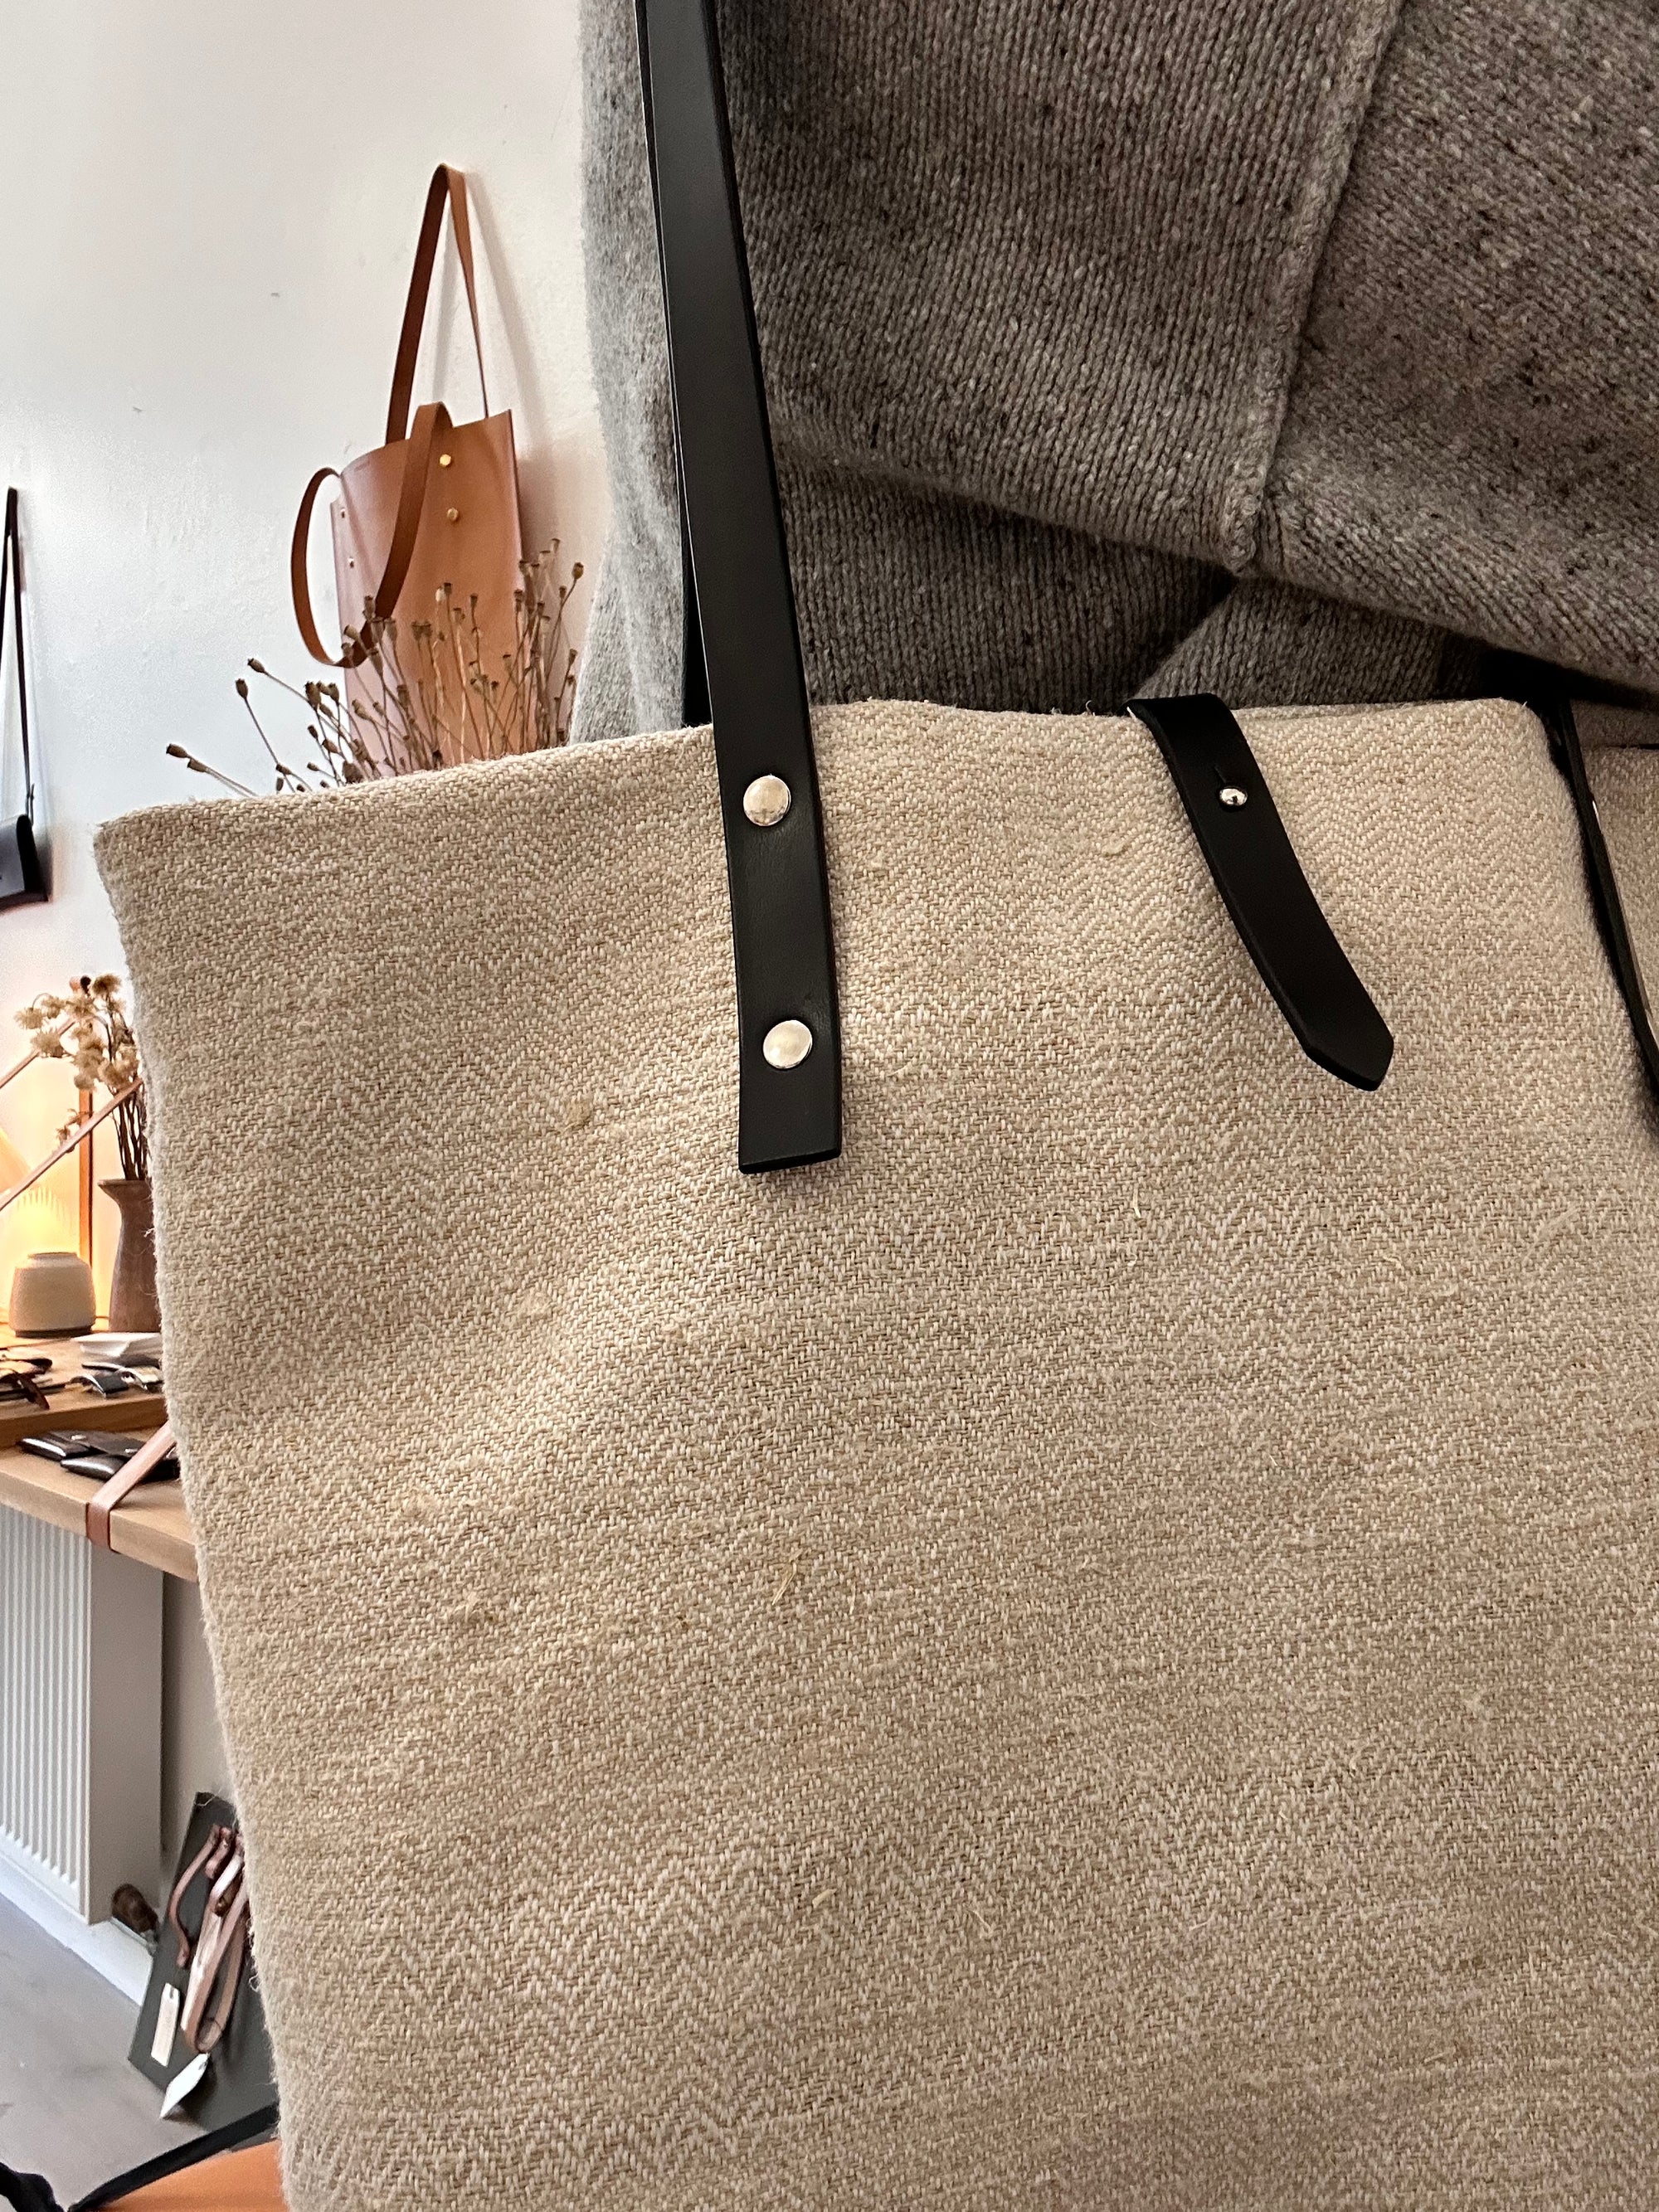 Textile tote - beige hemp with leather straps